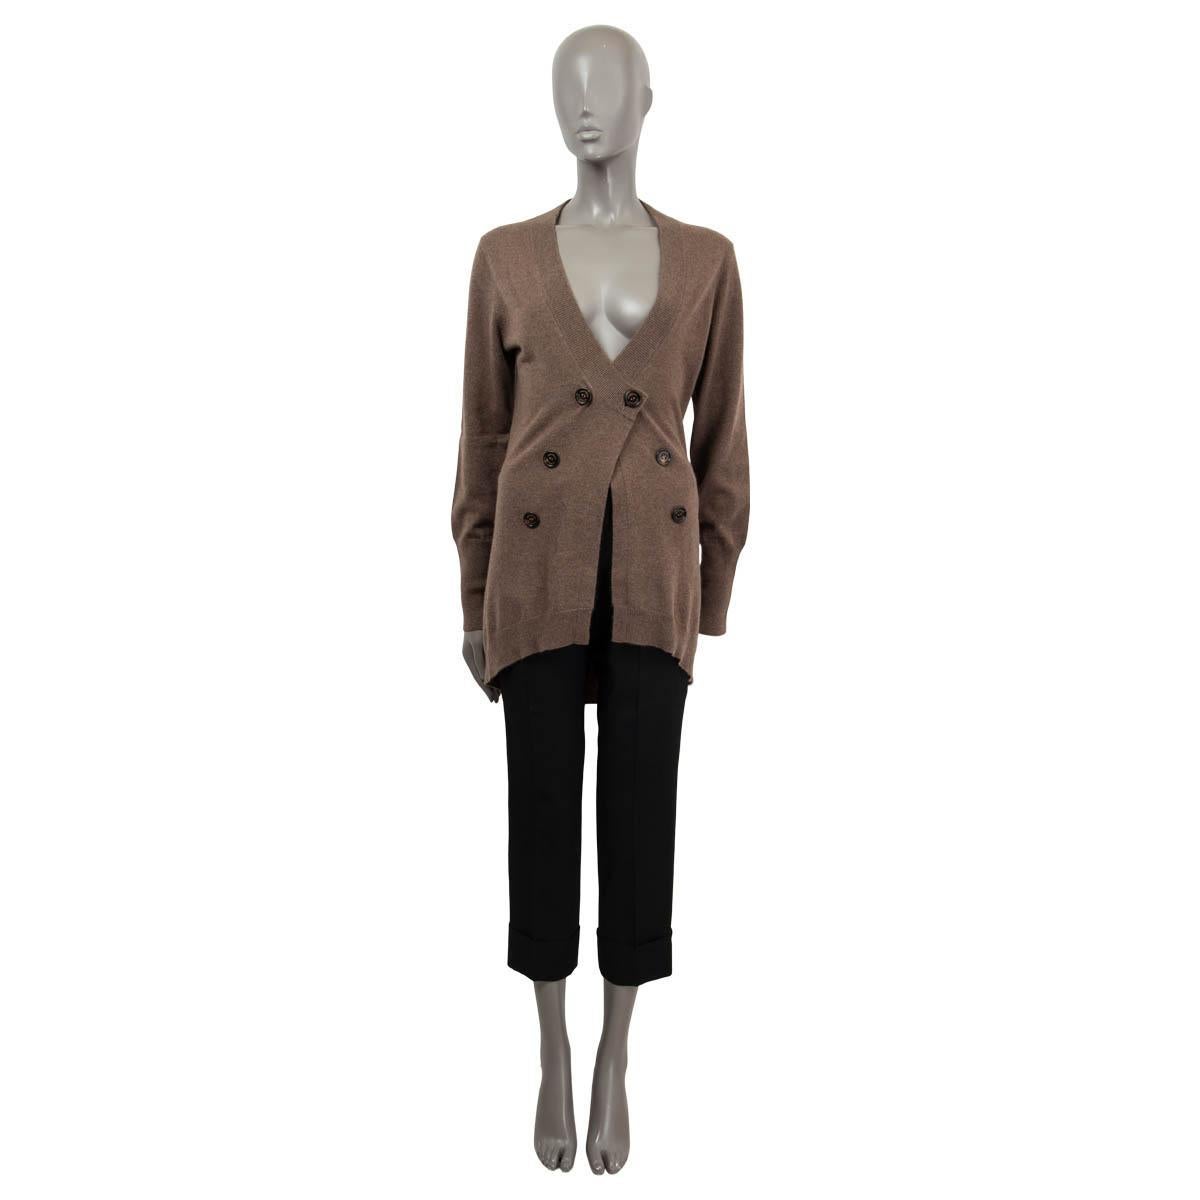 100% authentic Brunello Cucinelli double-breasted cardigan in brown cashmere (100%). Features horn buttons, a rib knit lapel and a high-low silhouette. Has been worn and is in excellent condition.

Measurements
Tag Size	XL
Size	XL
Shoulder